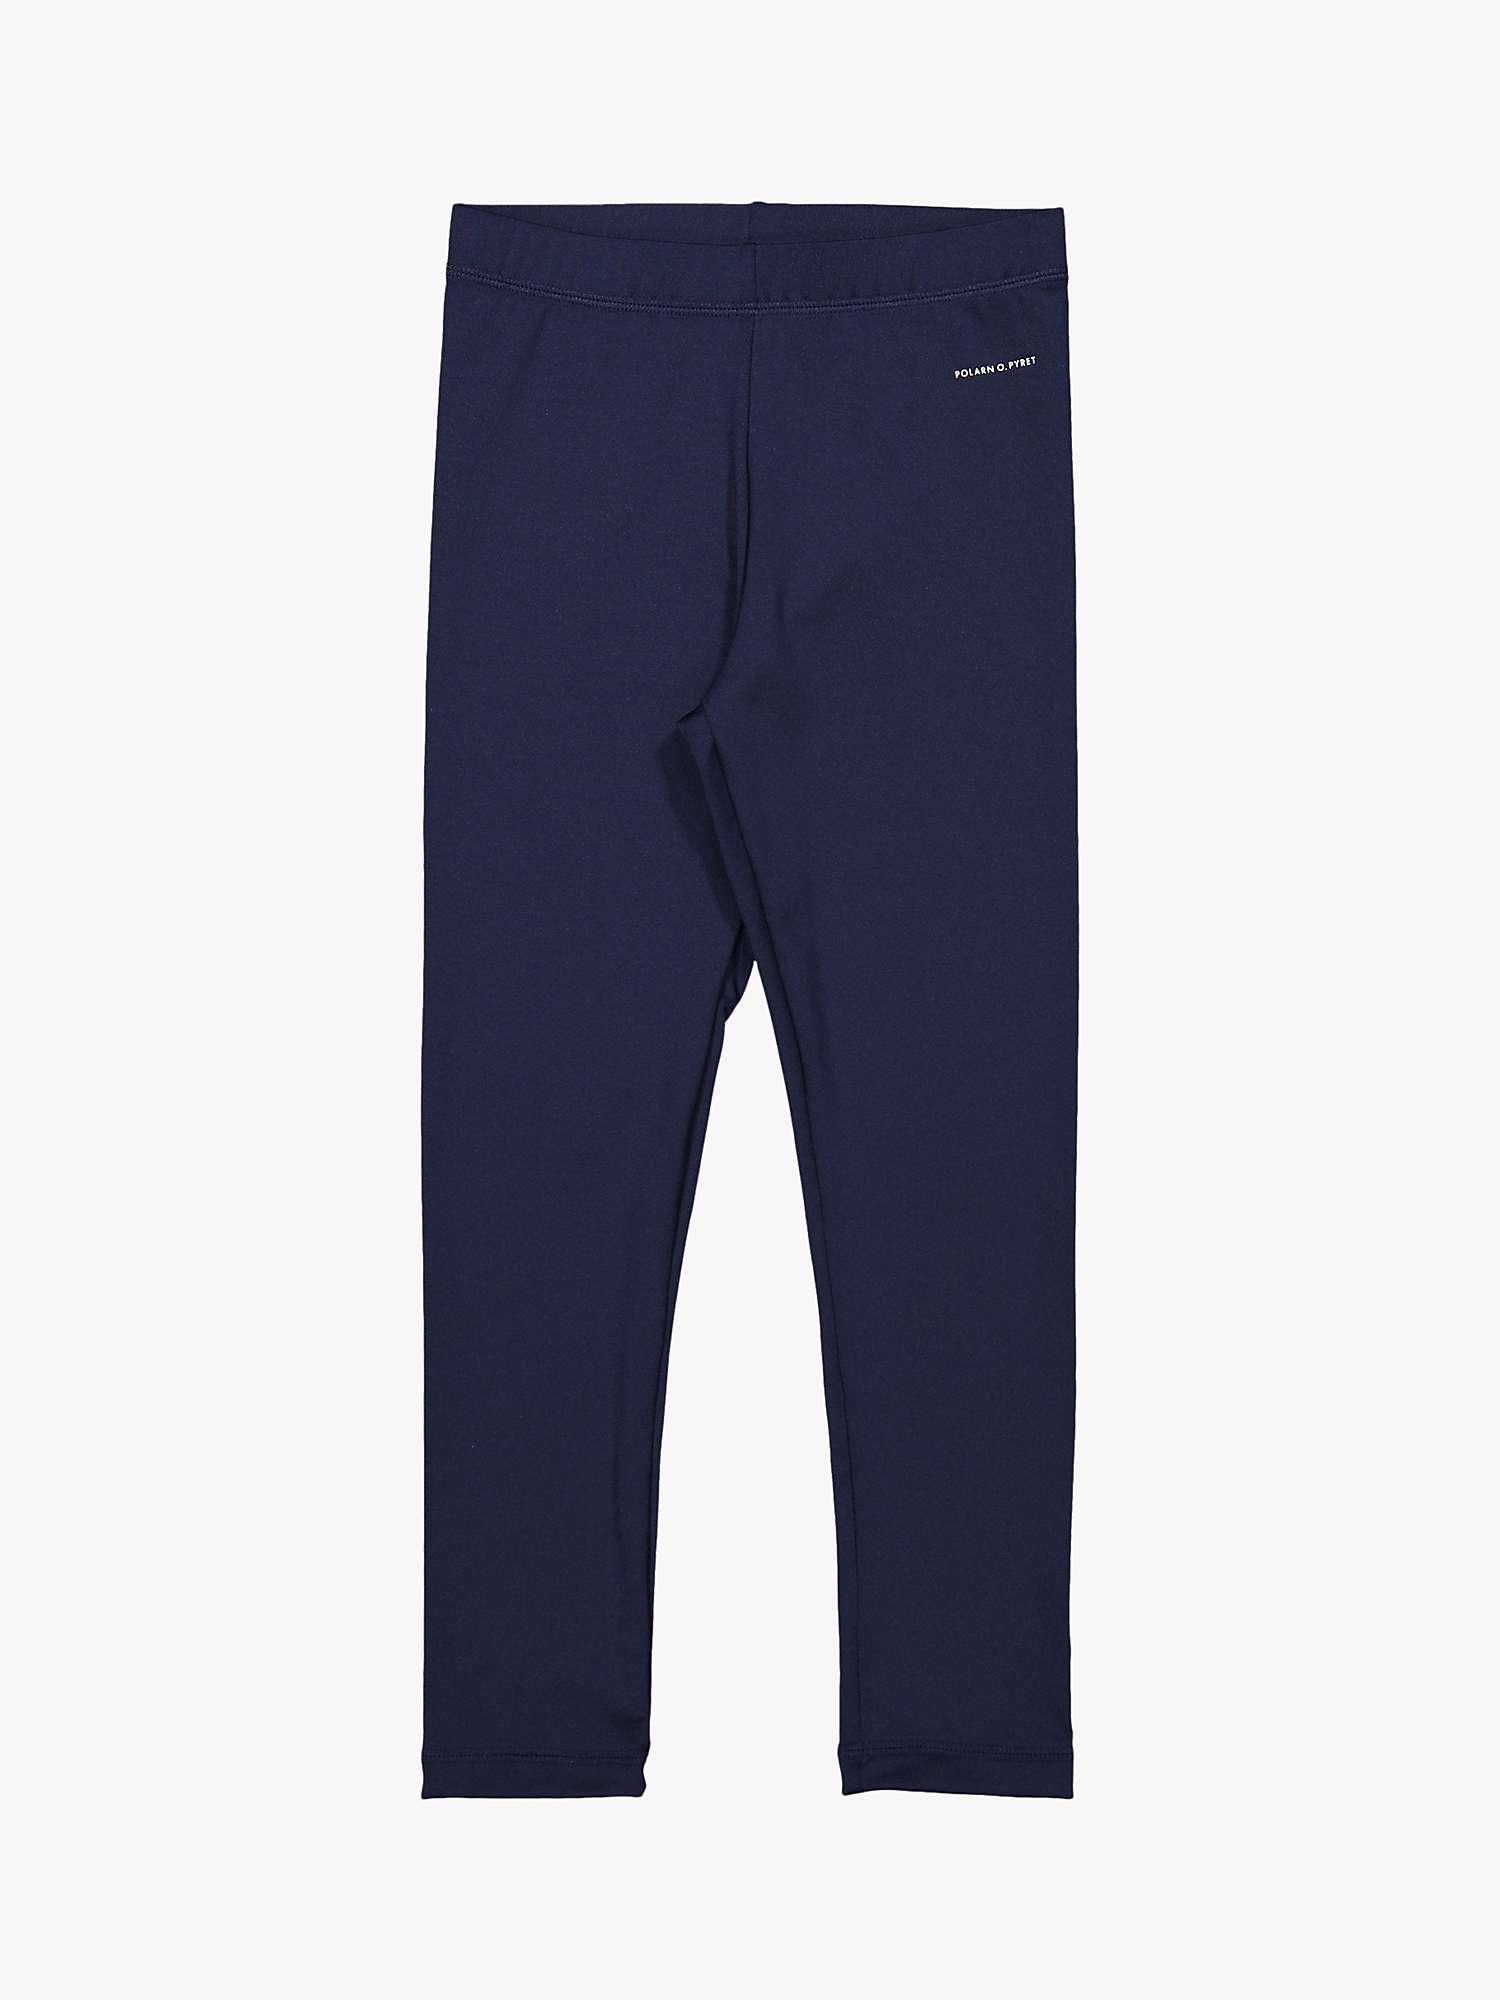 Buy Polarn O. Pyret Kids' UV Swimming Trousers, Navy Online at johnlewis.com